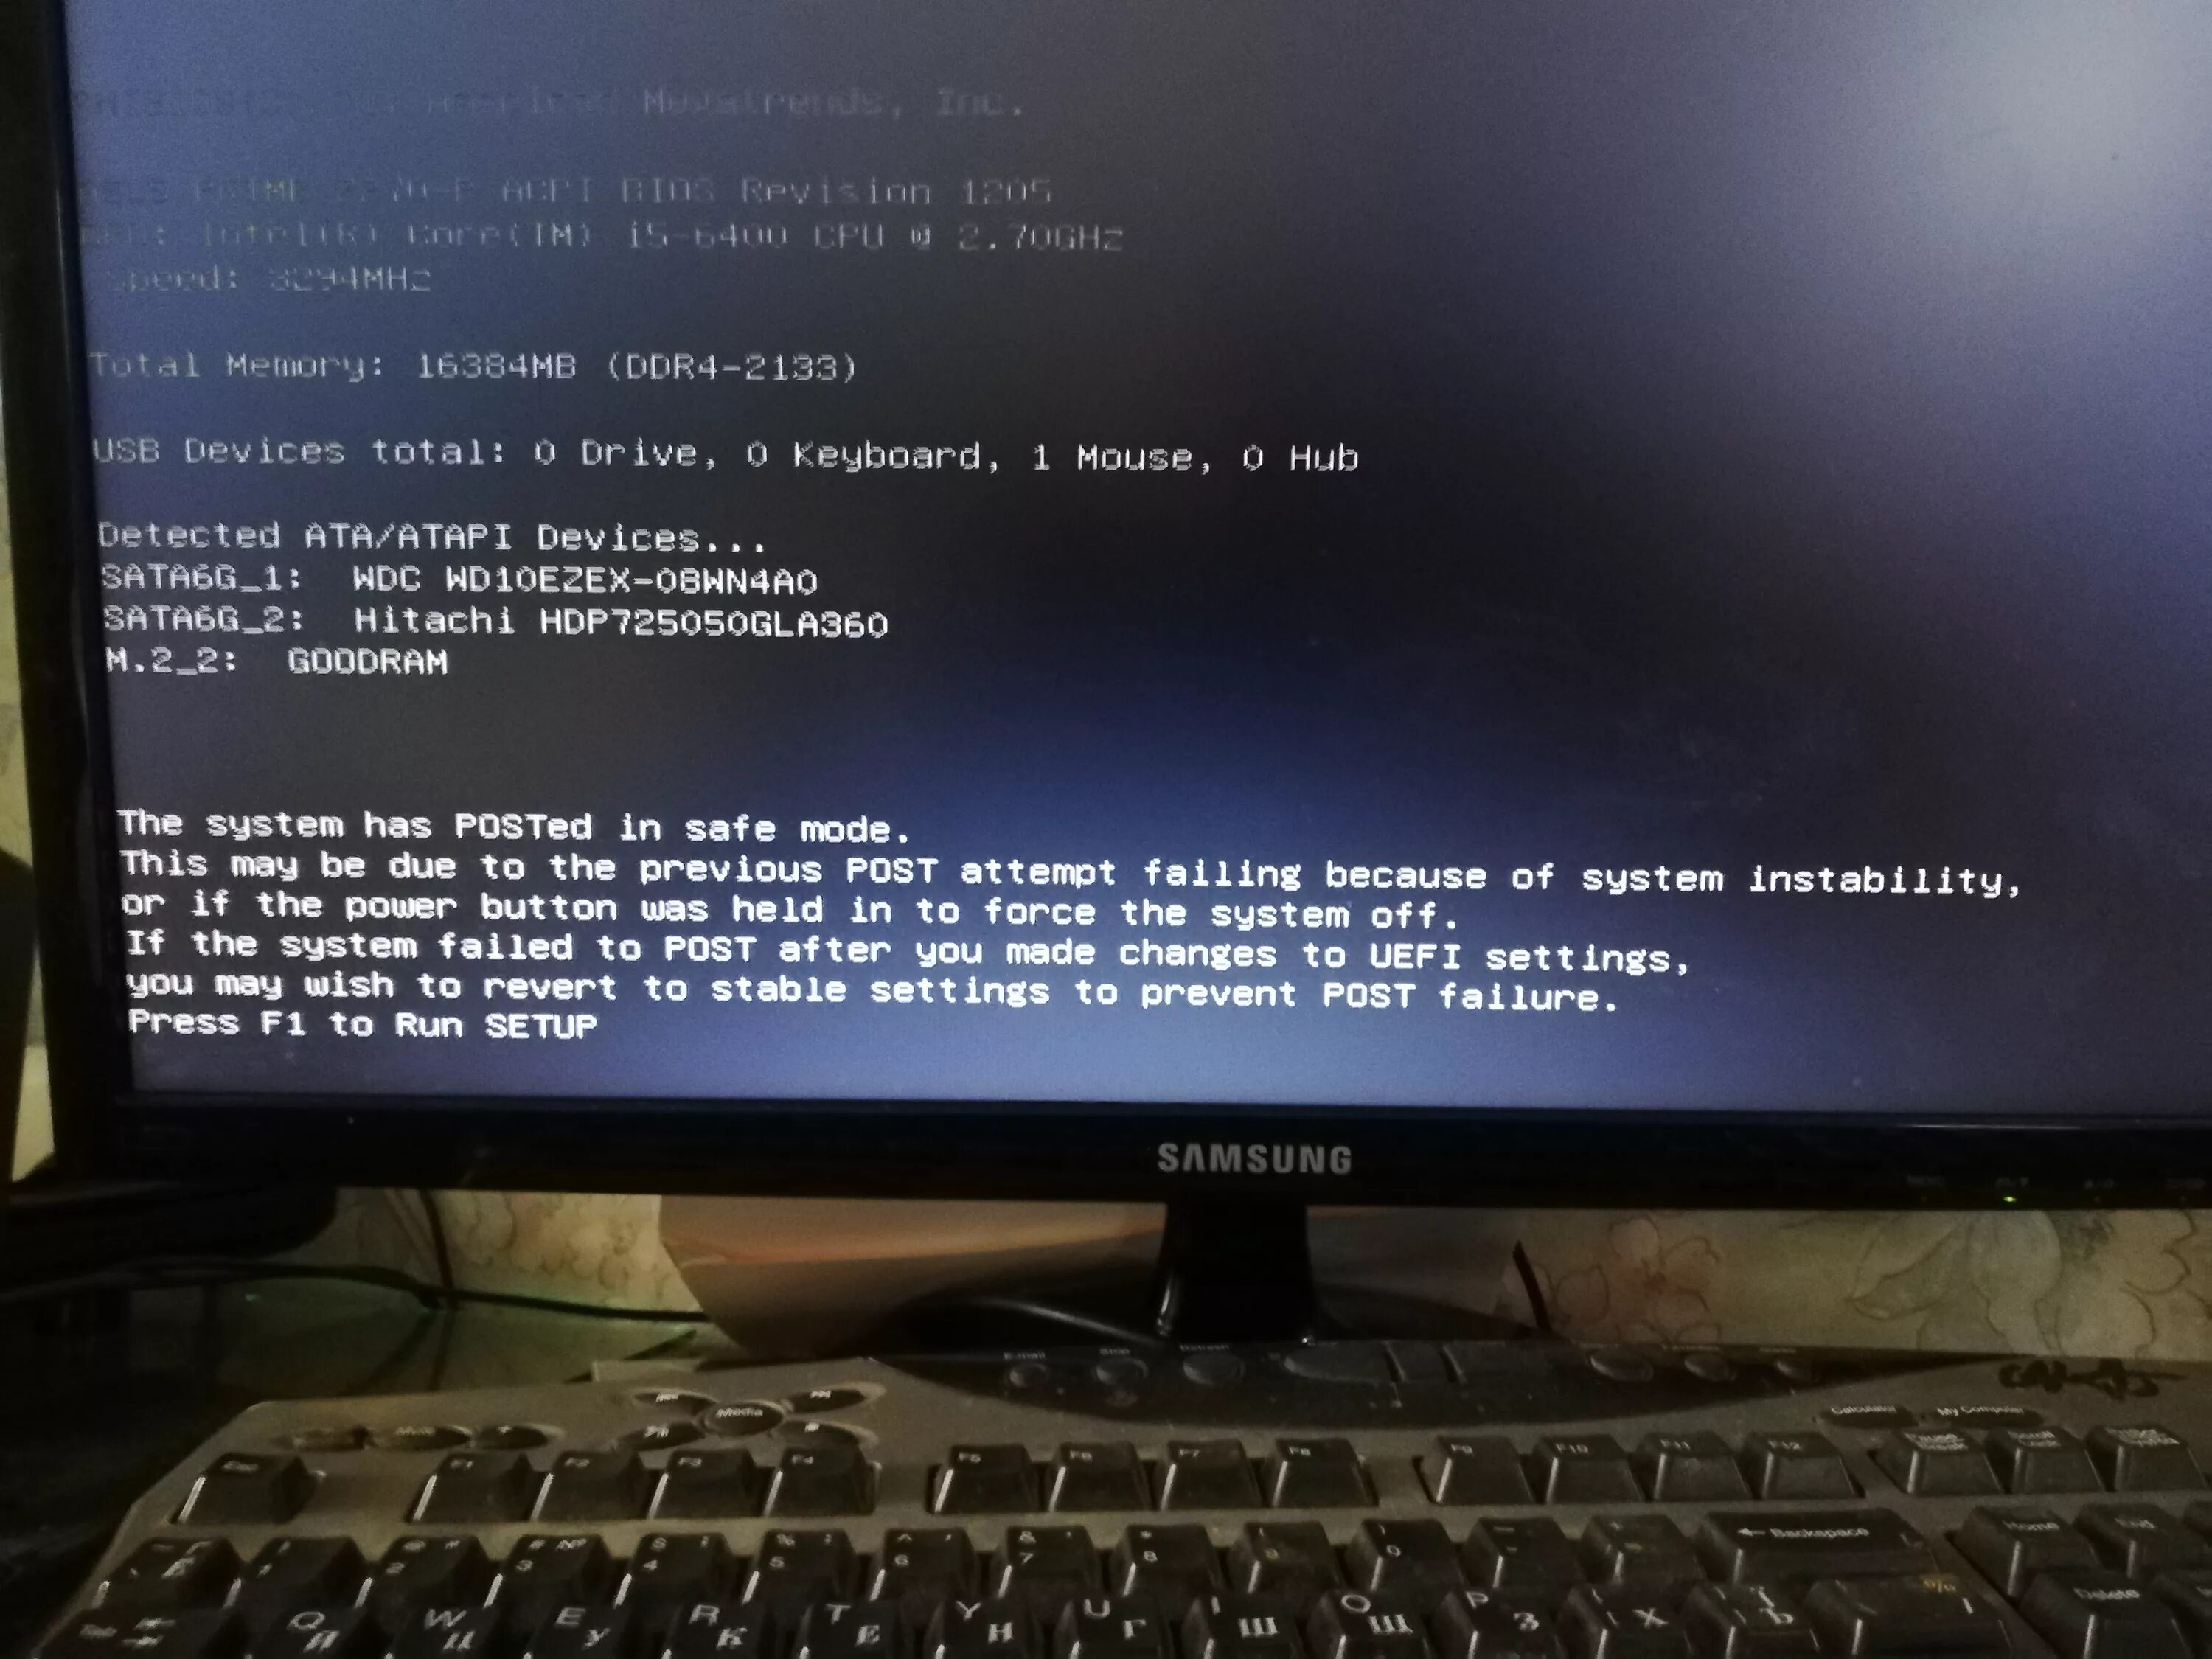 Post при загрузке компьютера. The System has Posted in safe Mode ASUS. Пики компьютера при запуске. The System has Posted in safe Mode при загрузке.